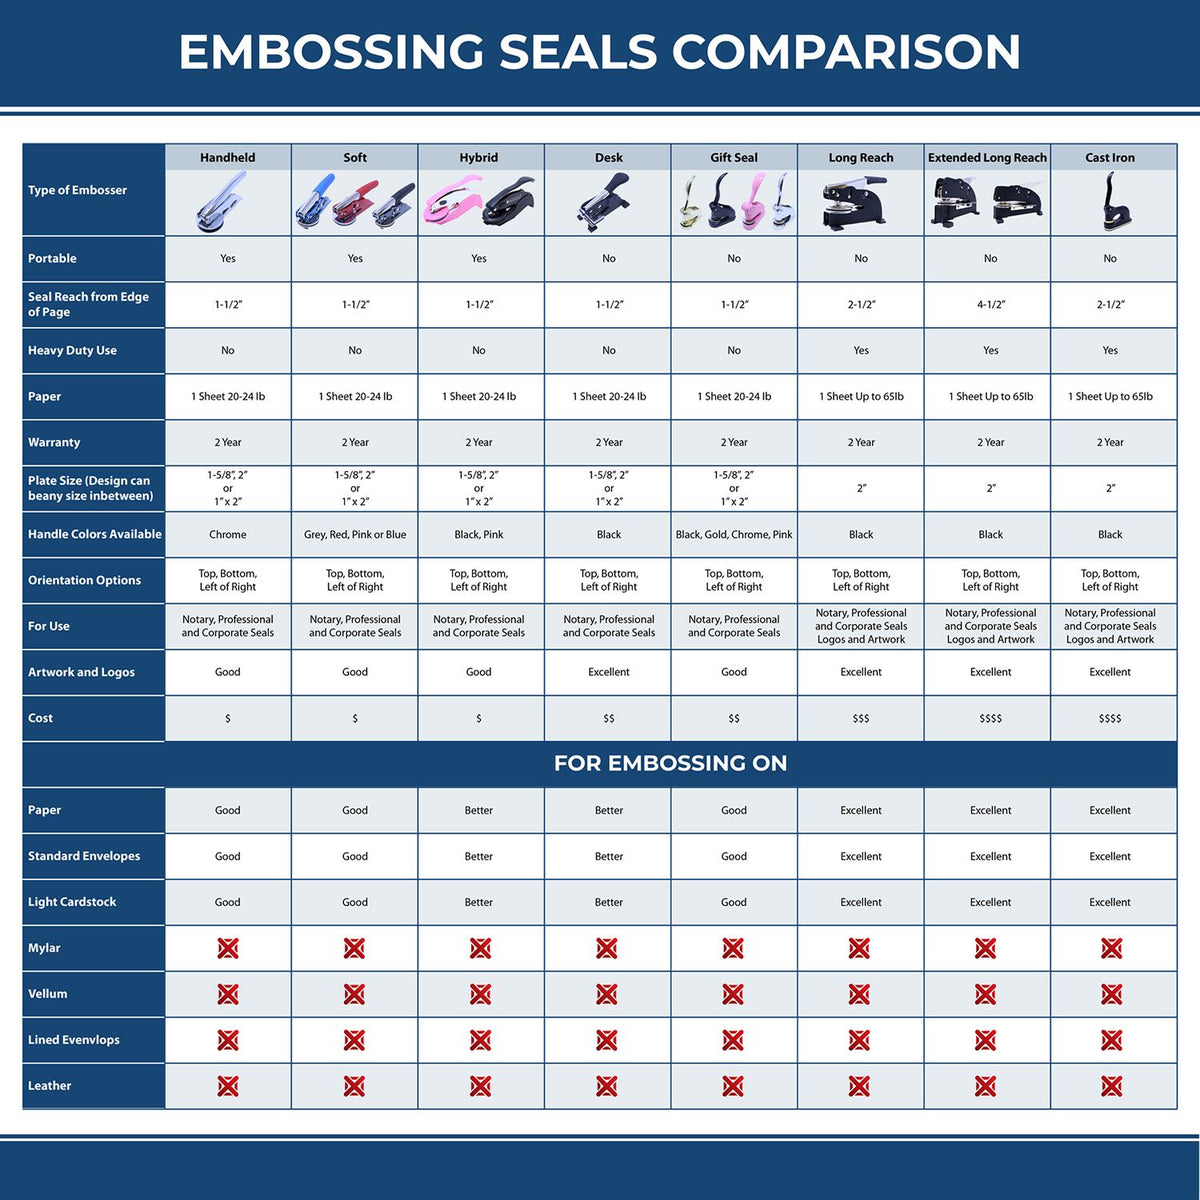 A comparison chart for the different types of mount models available for the Heavy Duty Cast Iron Louisiana Geologist Seal Embosser